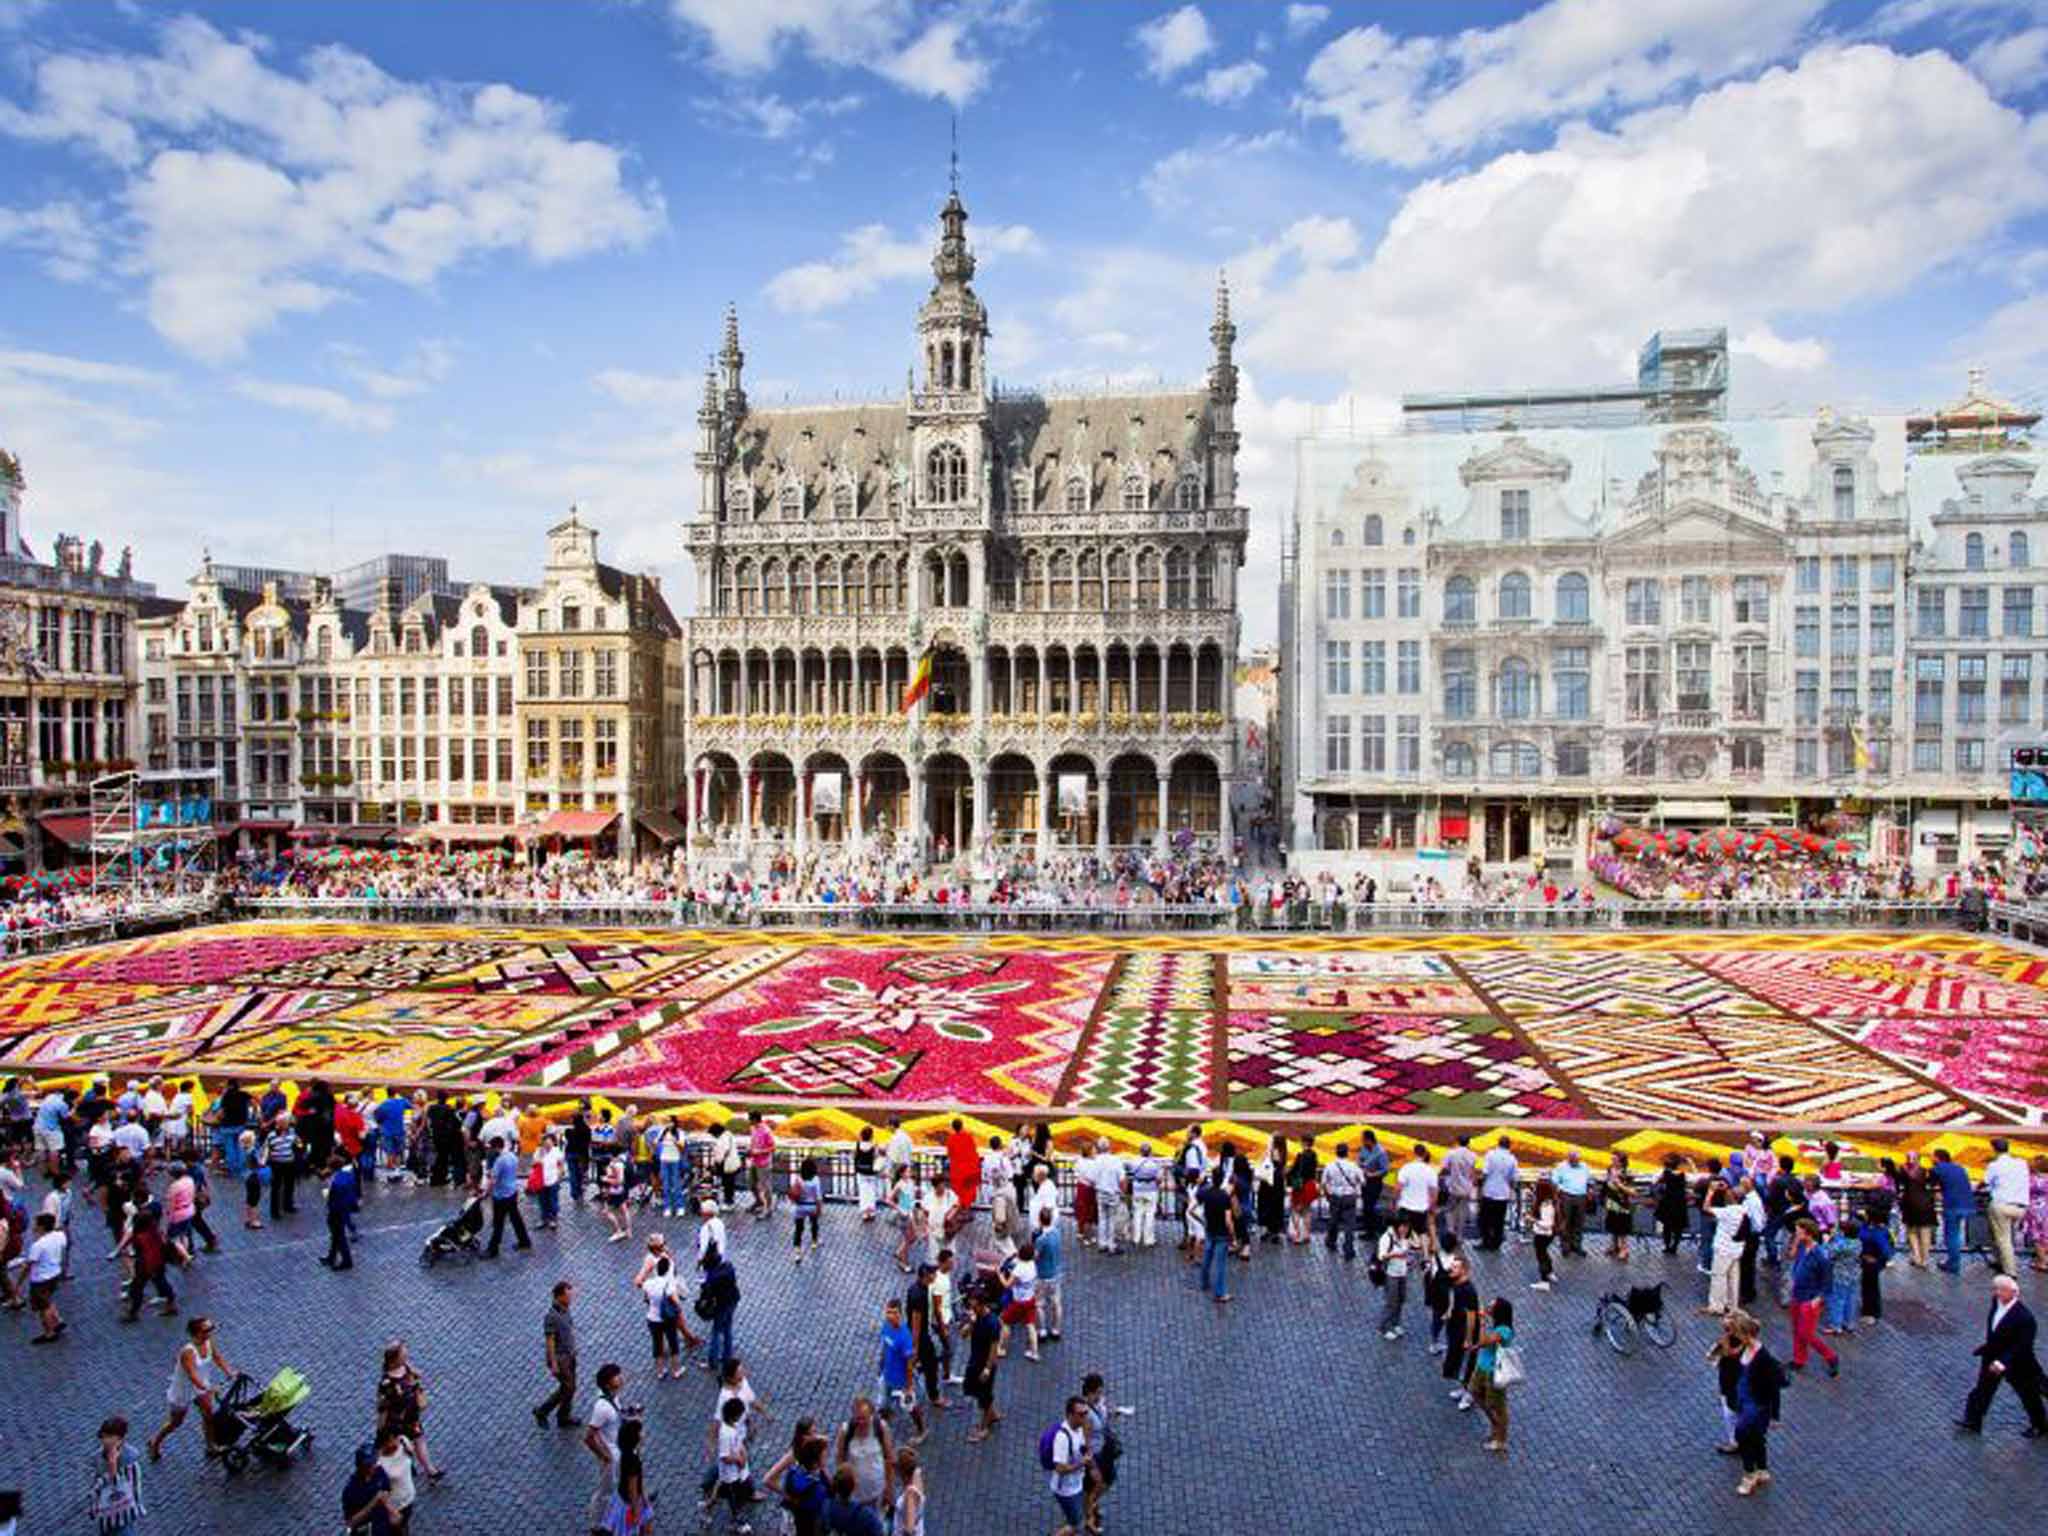 Brussels travel tips: Where to go and what to see in 48 hours | The Independent | The Independent